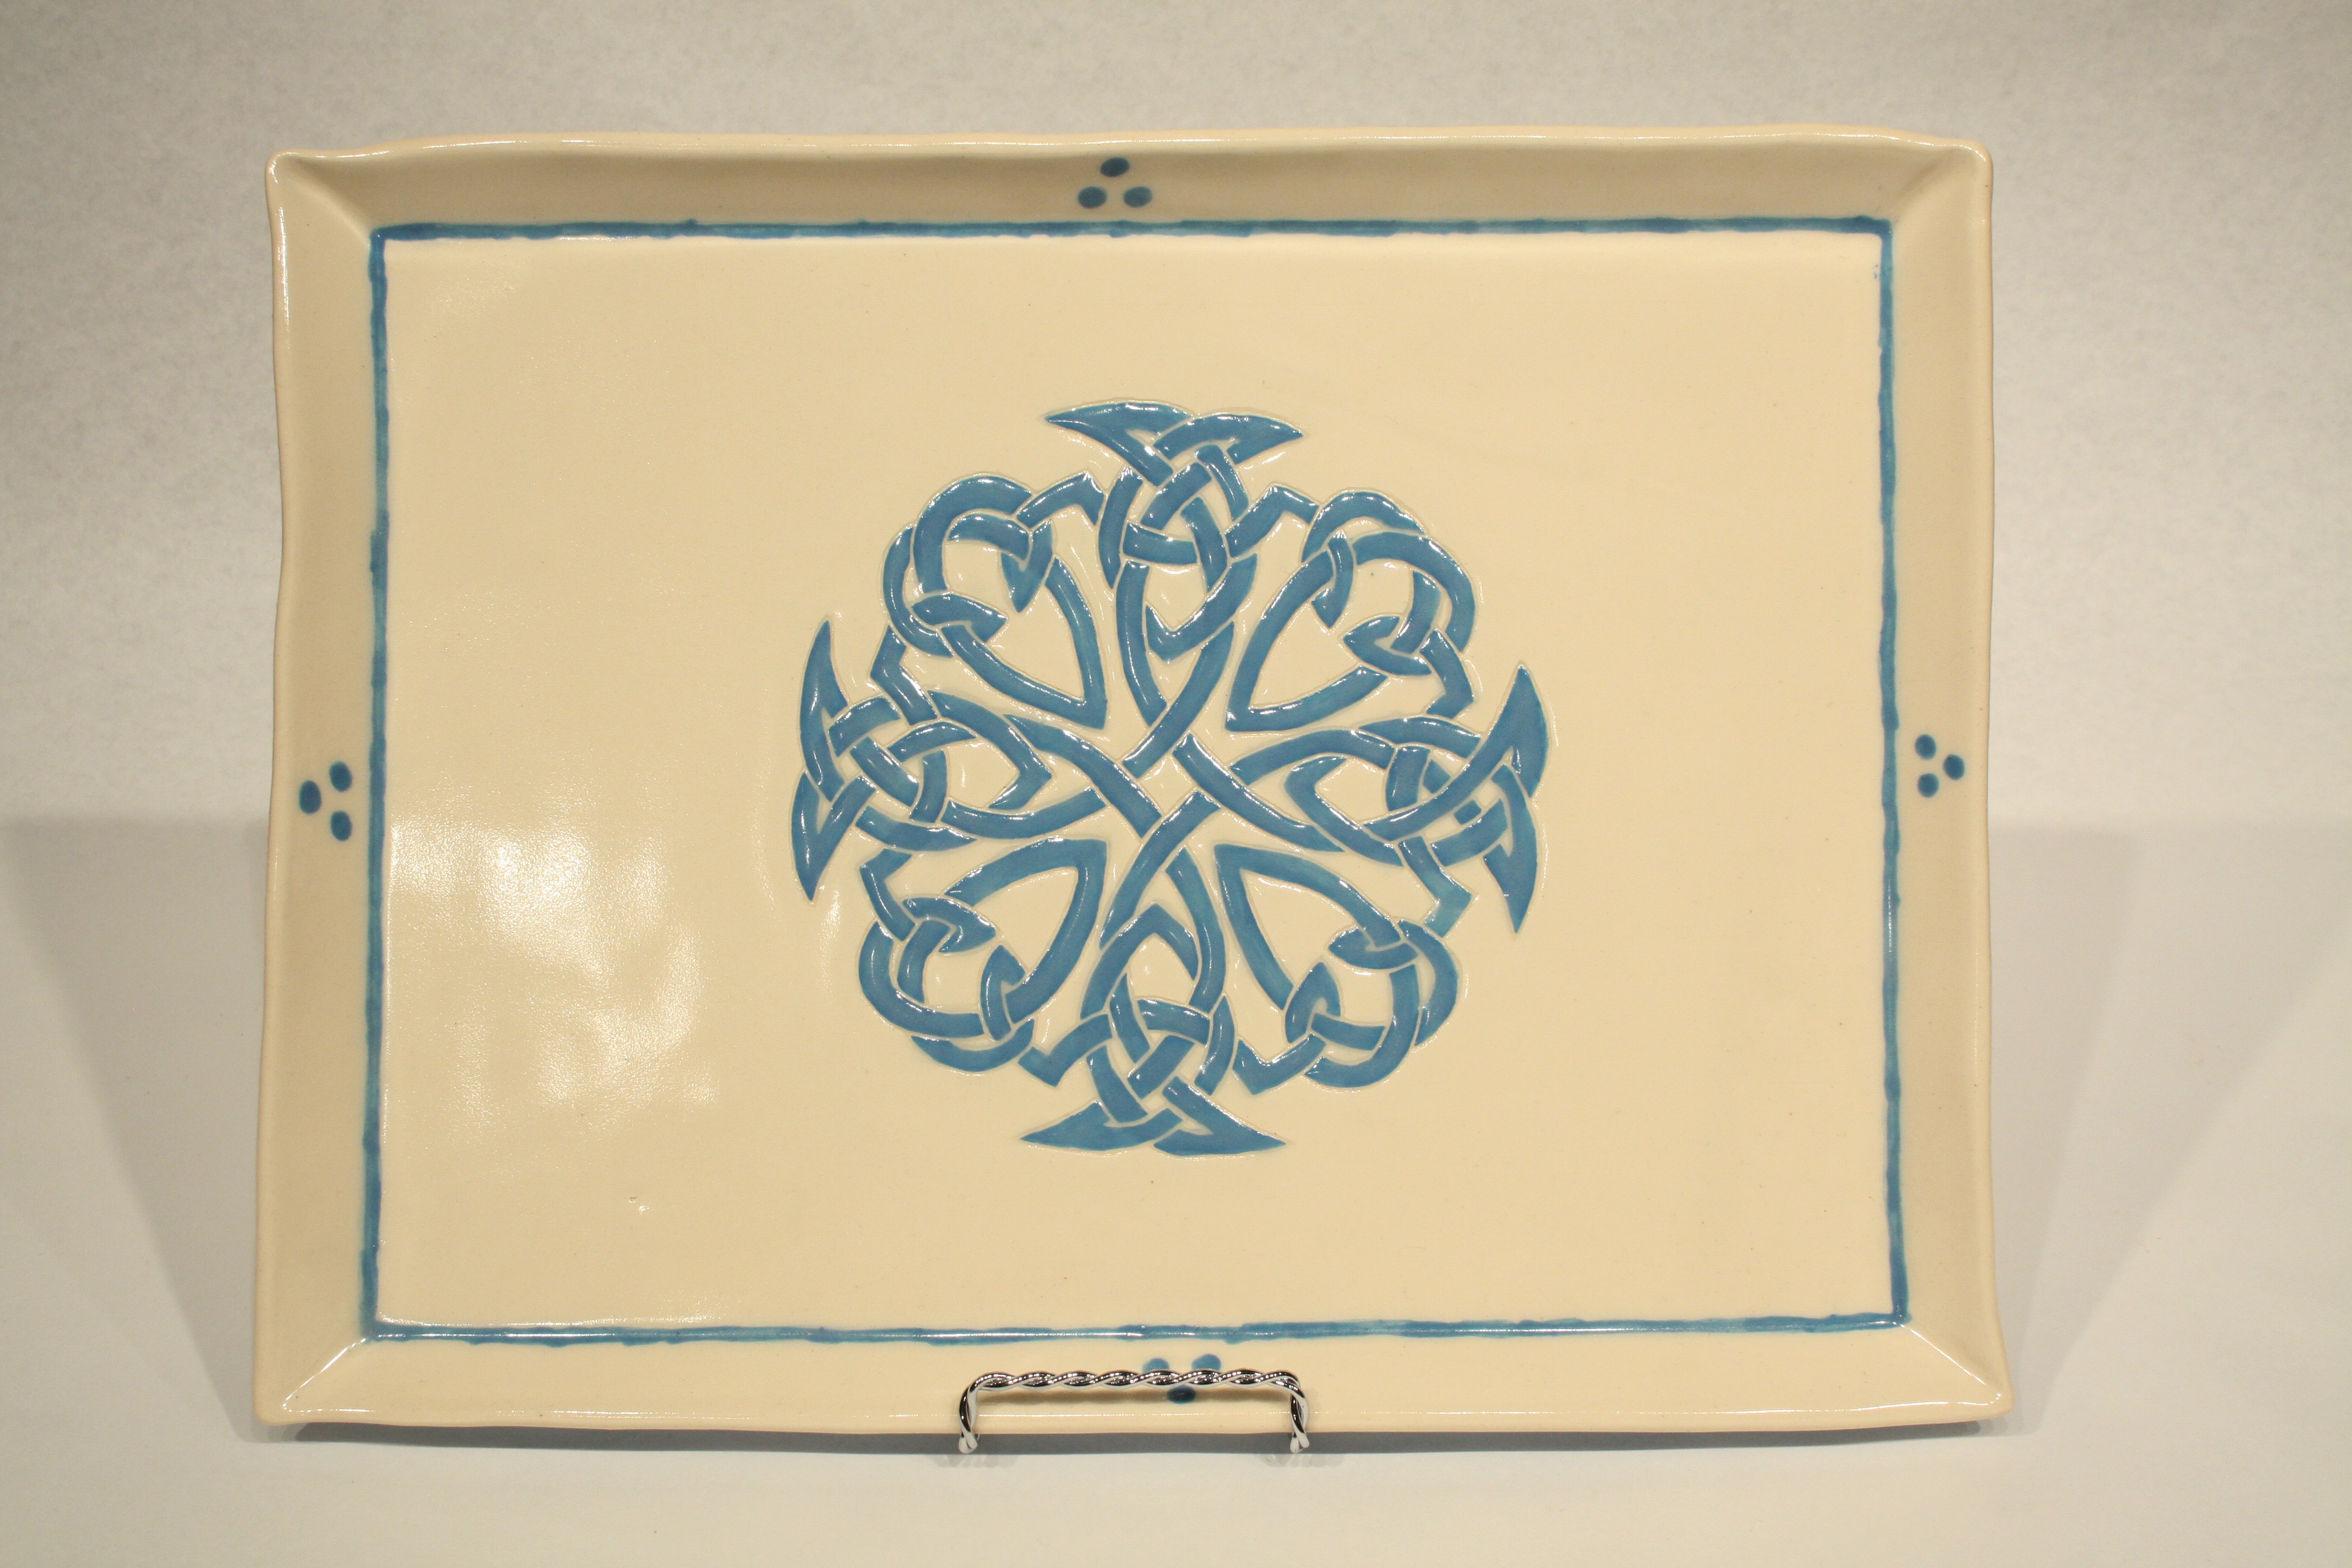 White ceramic plate with intricate blue Celtic knot design in center by Sophia Hart.